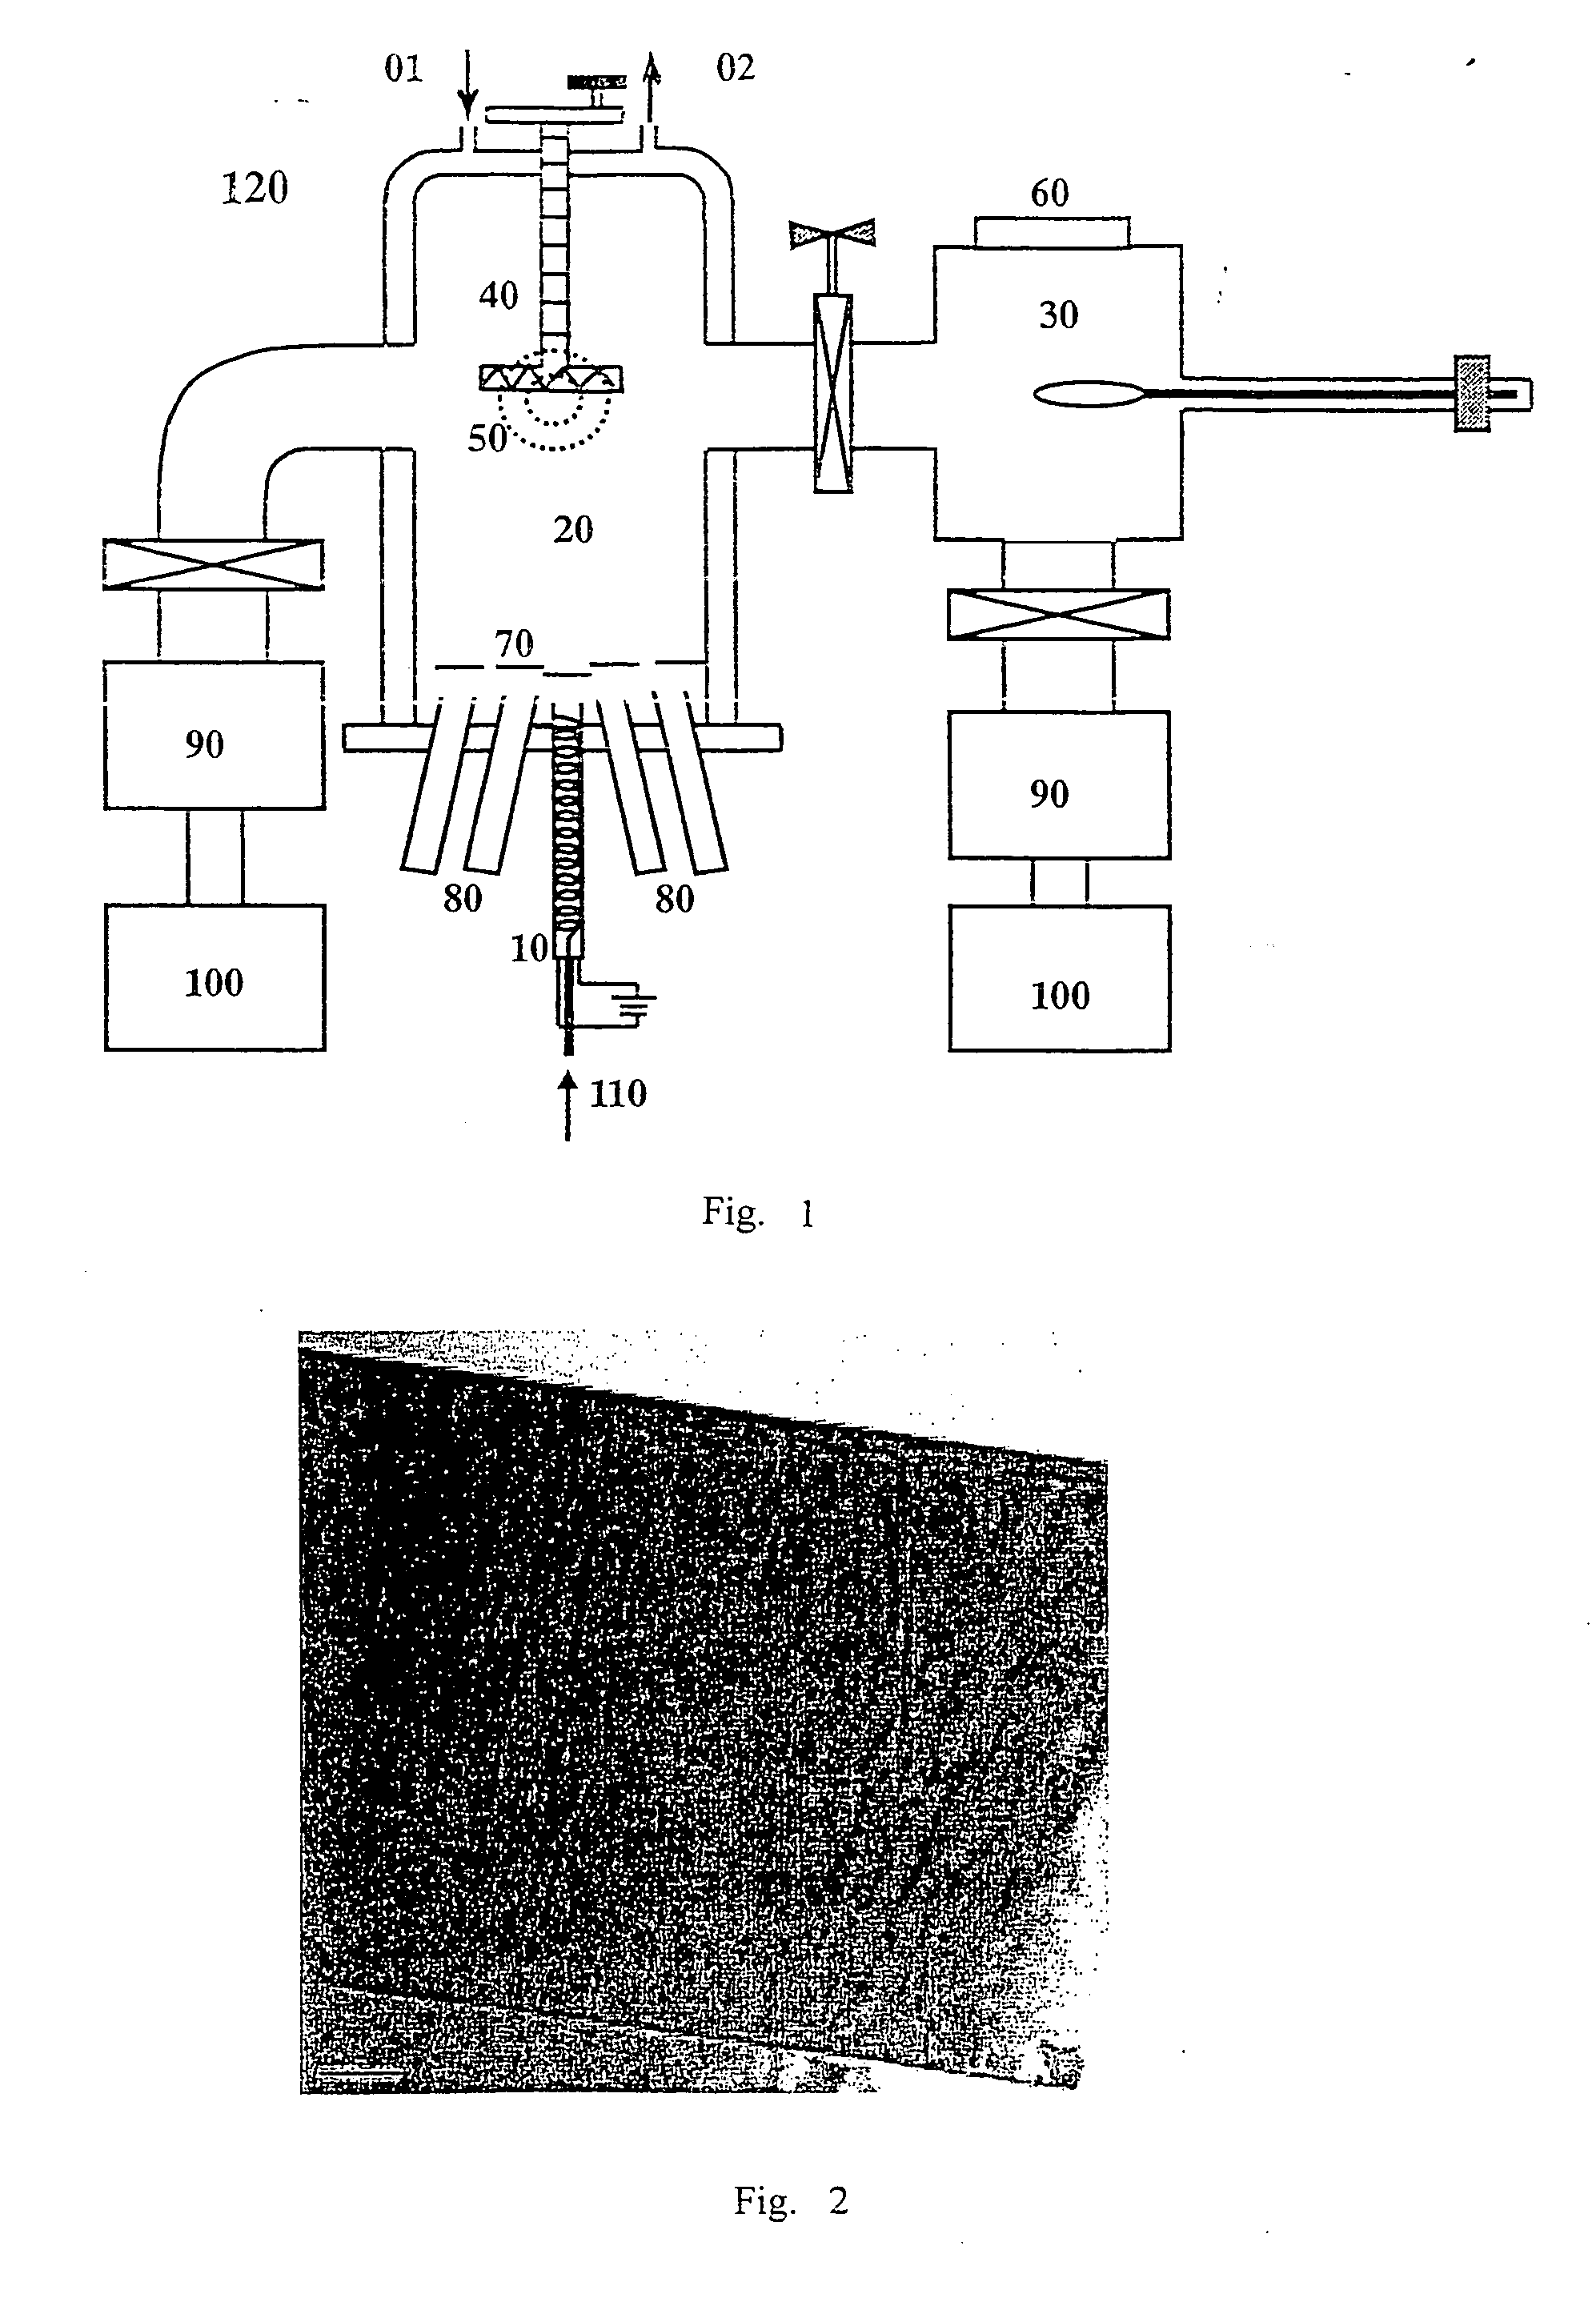 Apparatus of catalytic molecule beam epitaxy and process for growing III-nitride materials using the apparatus